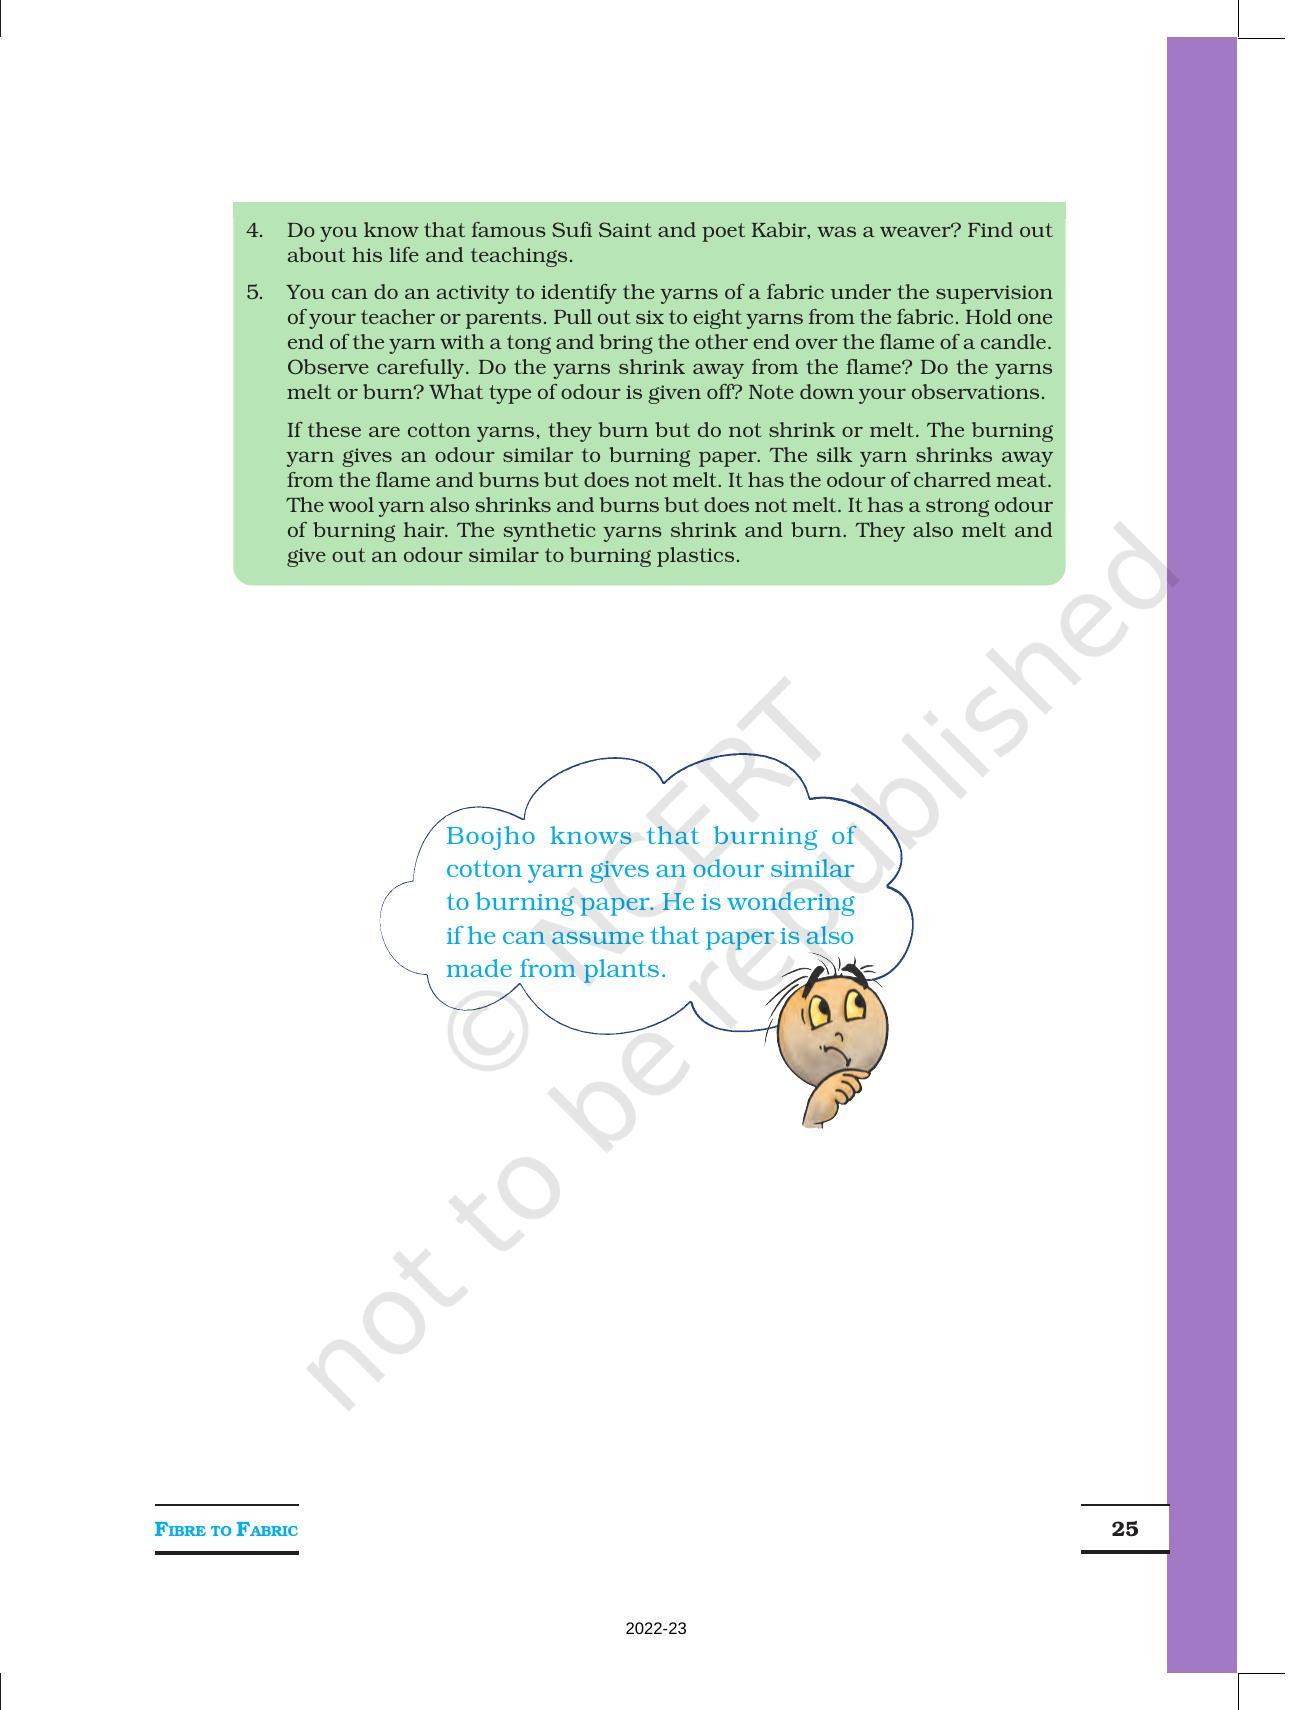 NCERT Book for Class 6 Science: Chapter 3-Fibre to Fabric - Page 8